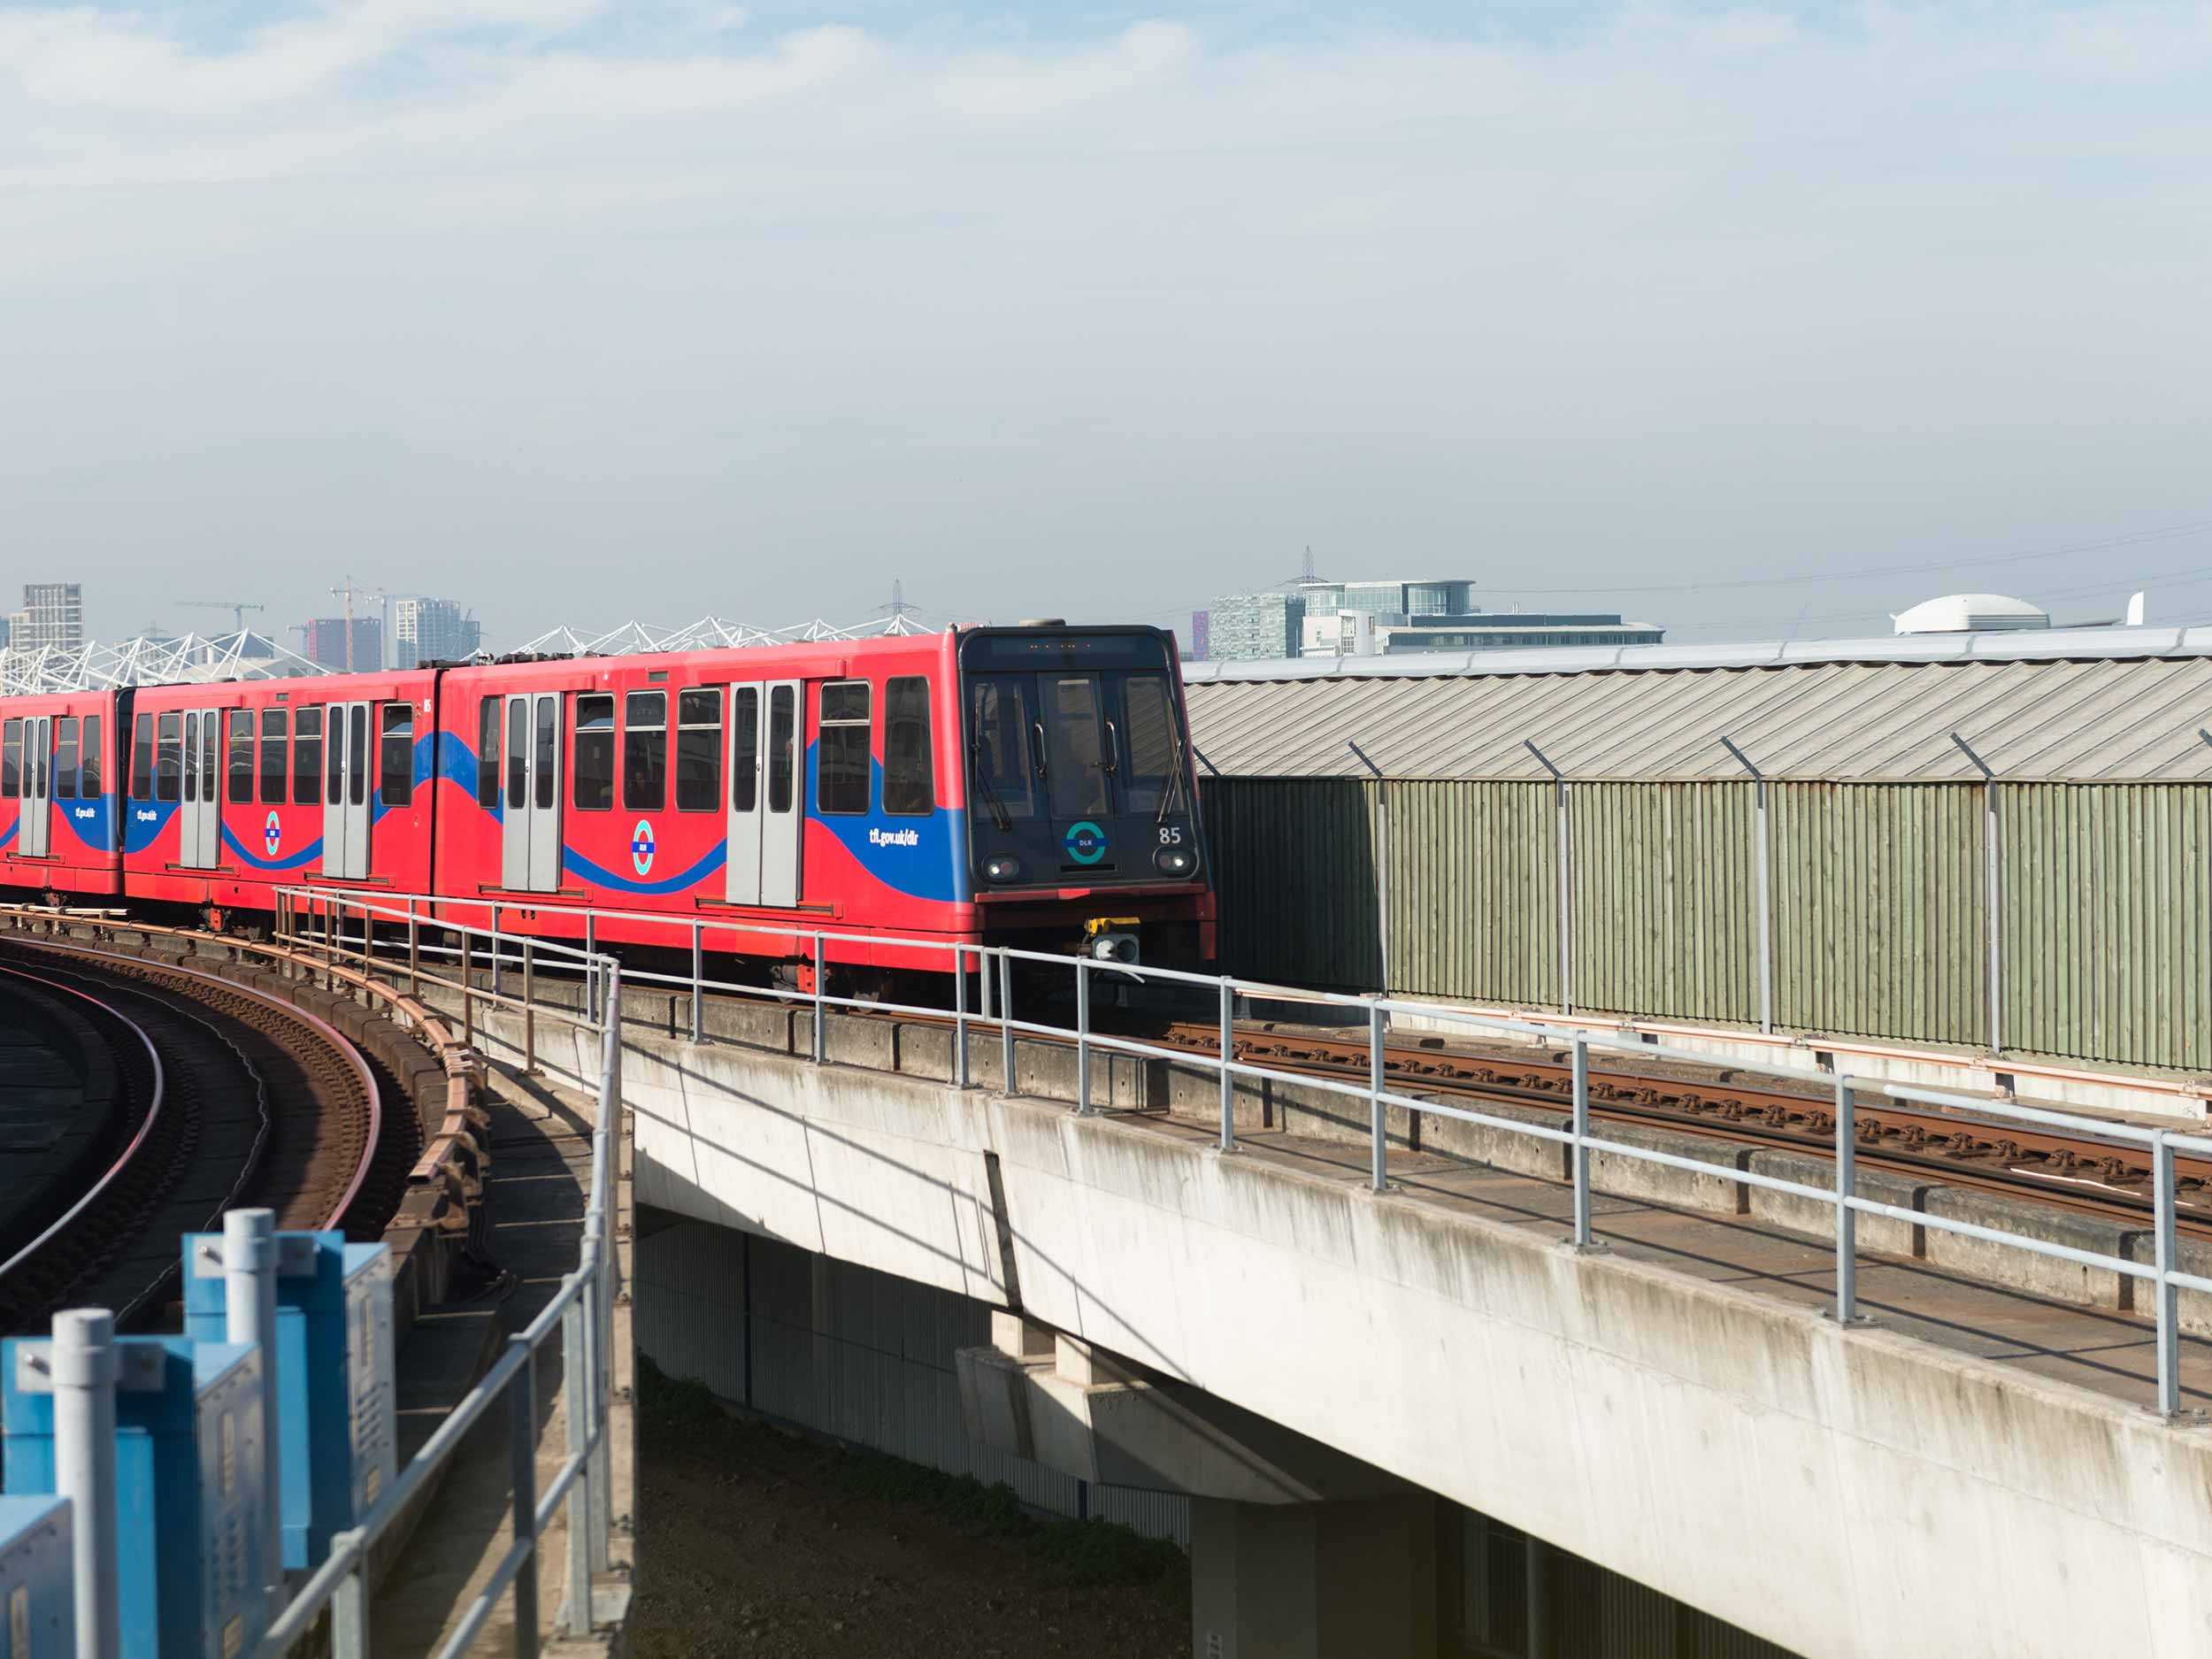 DLR train approaching along a track